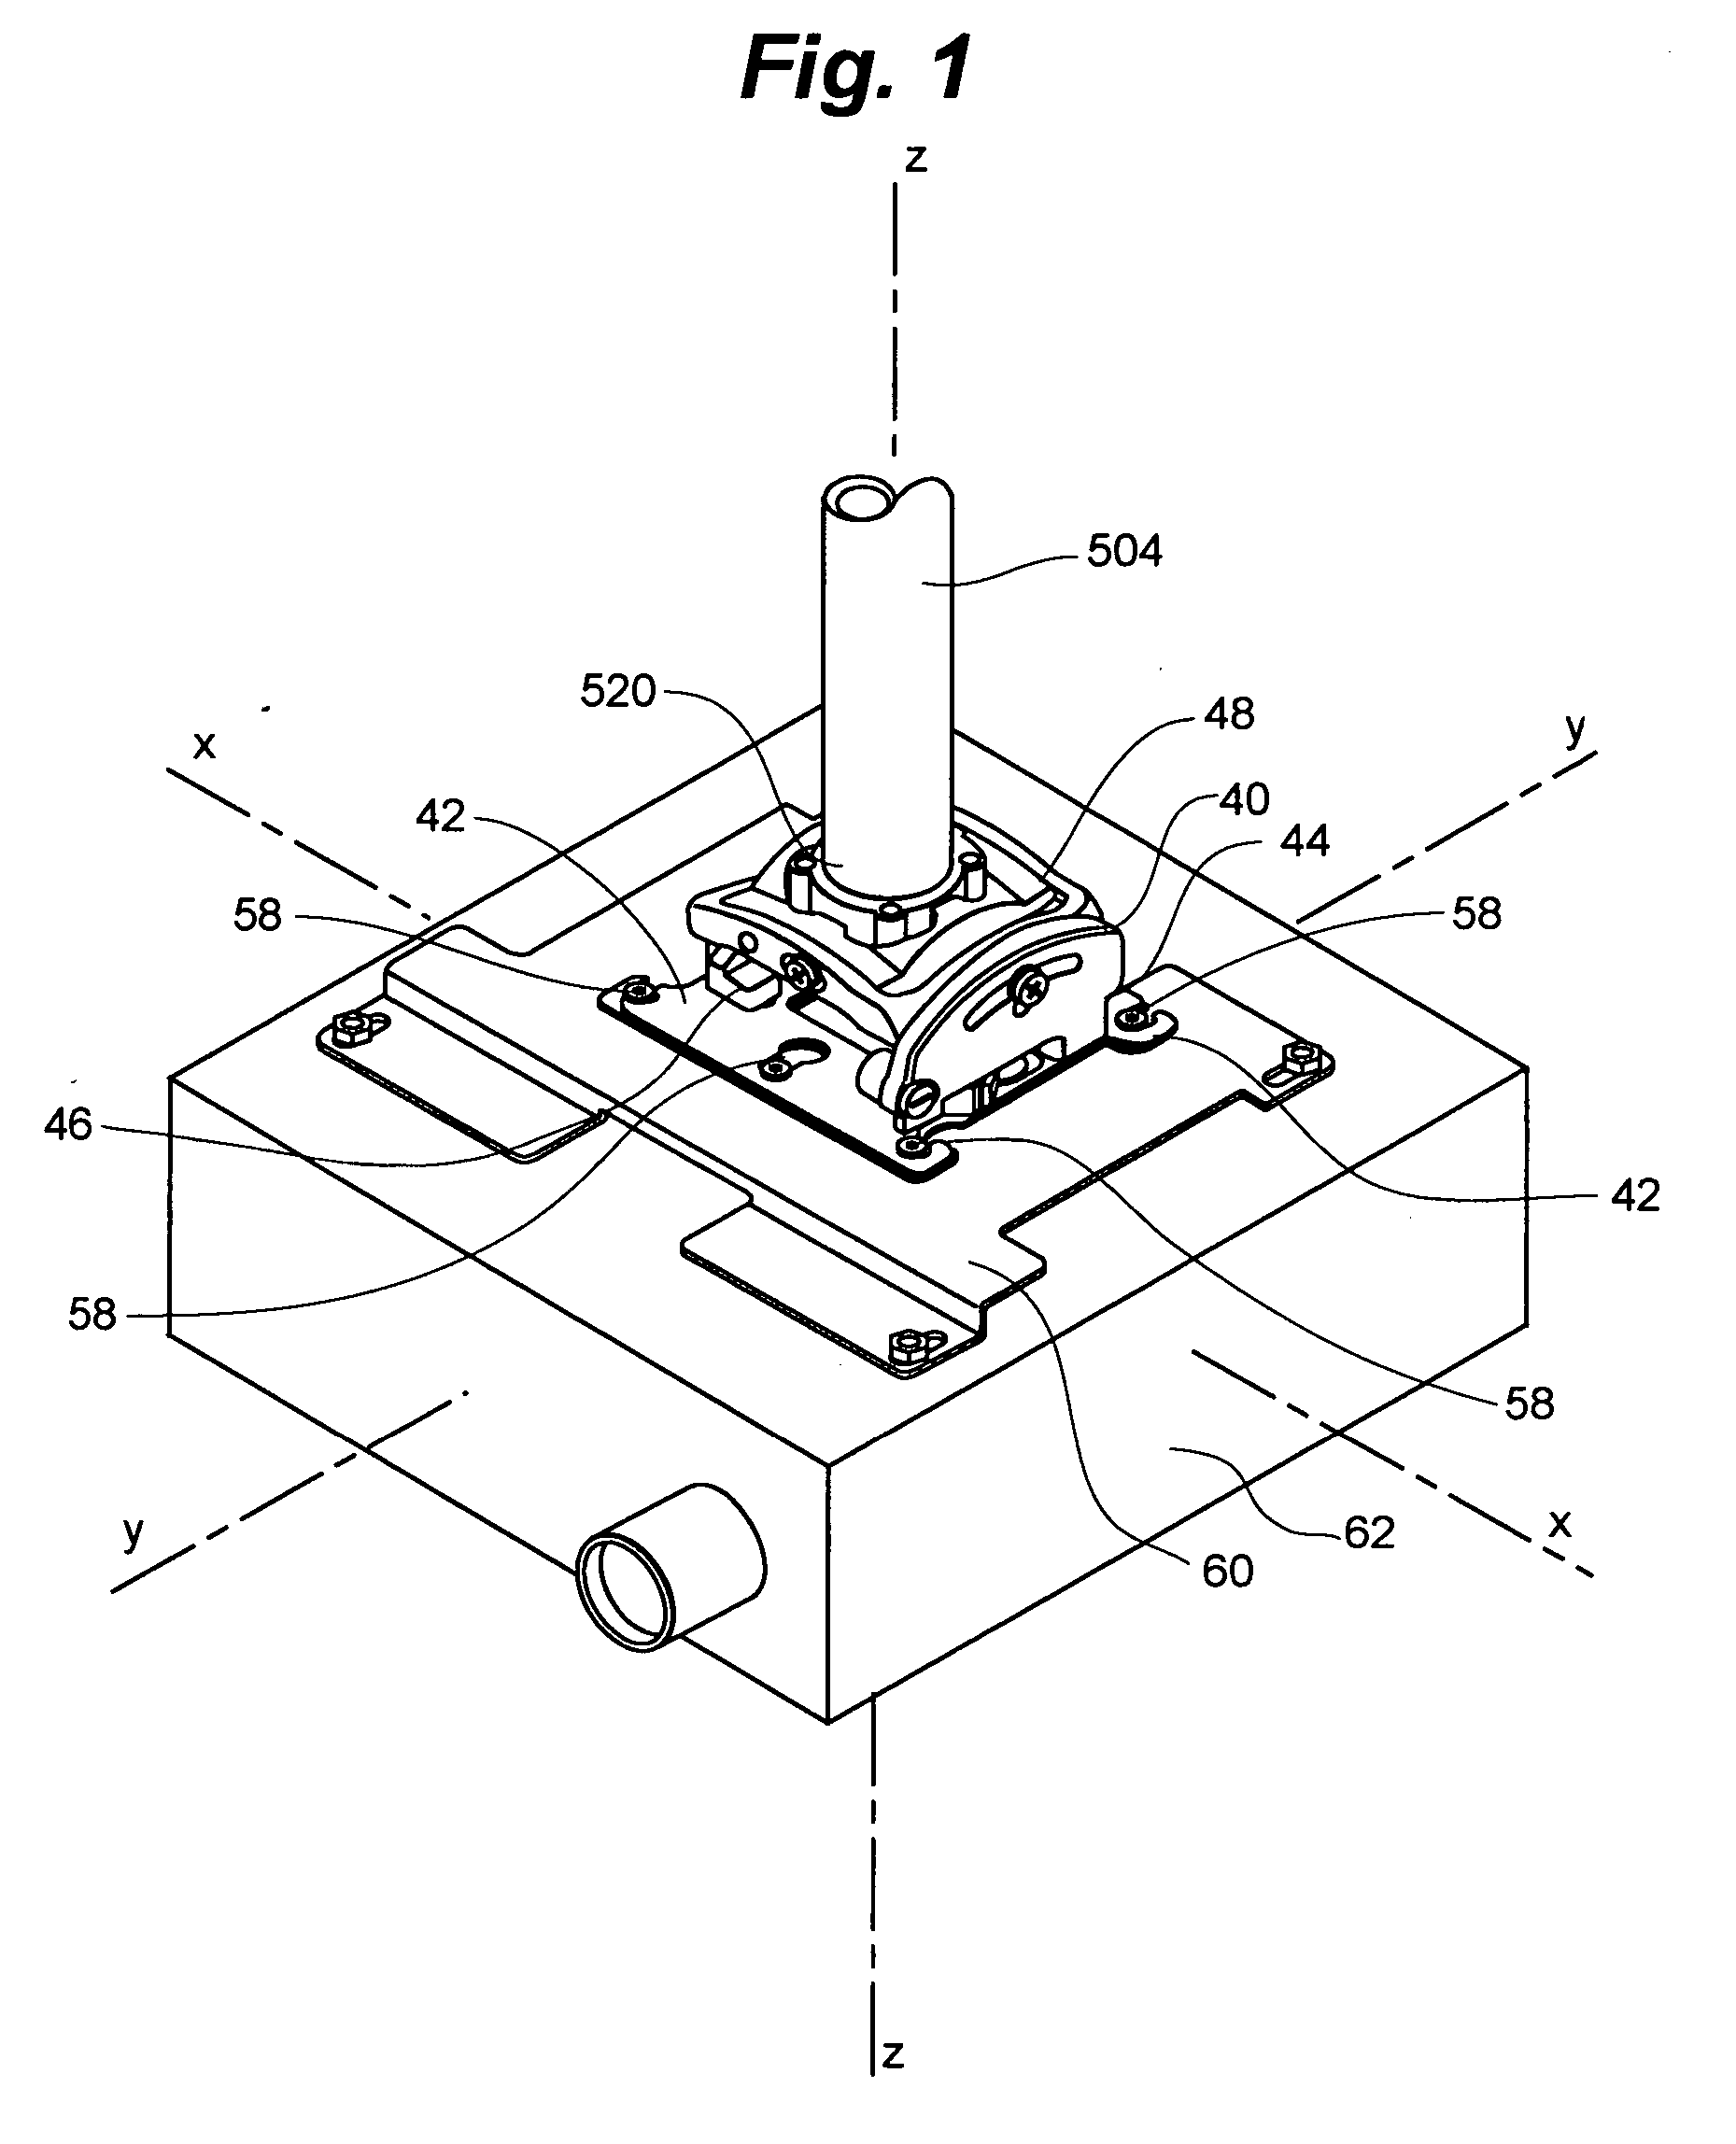 Adjustable projector mount with quick release device interface